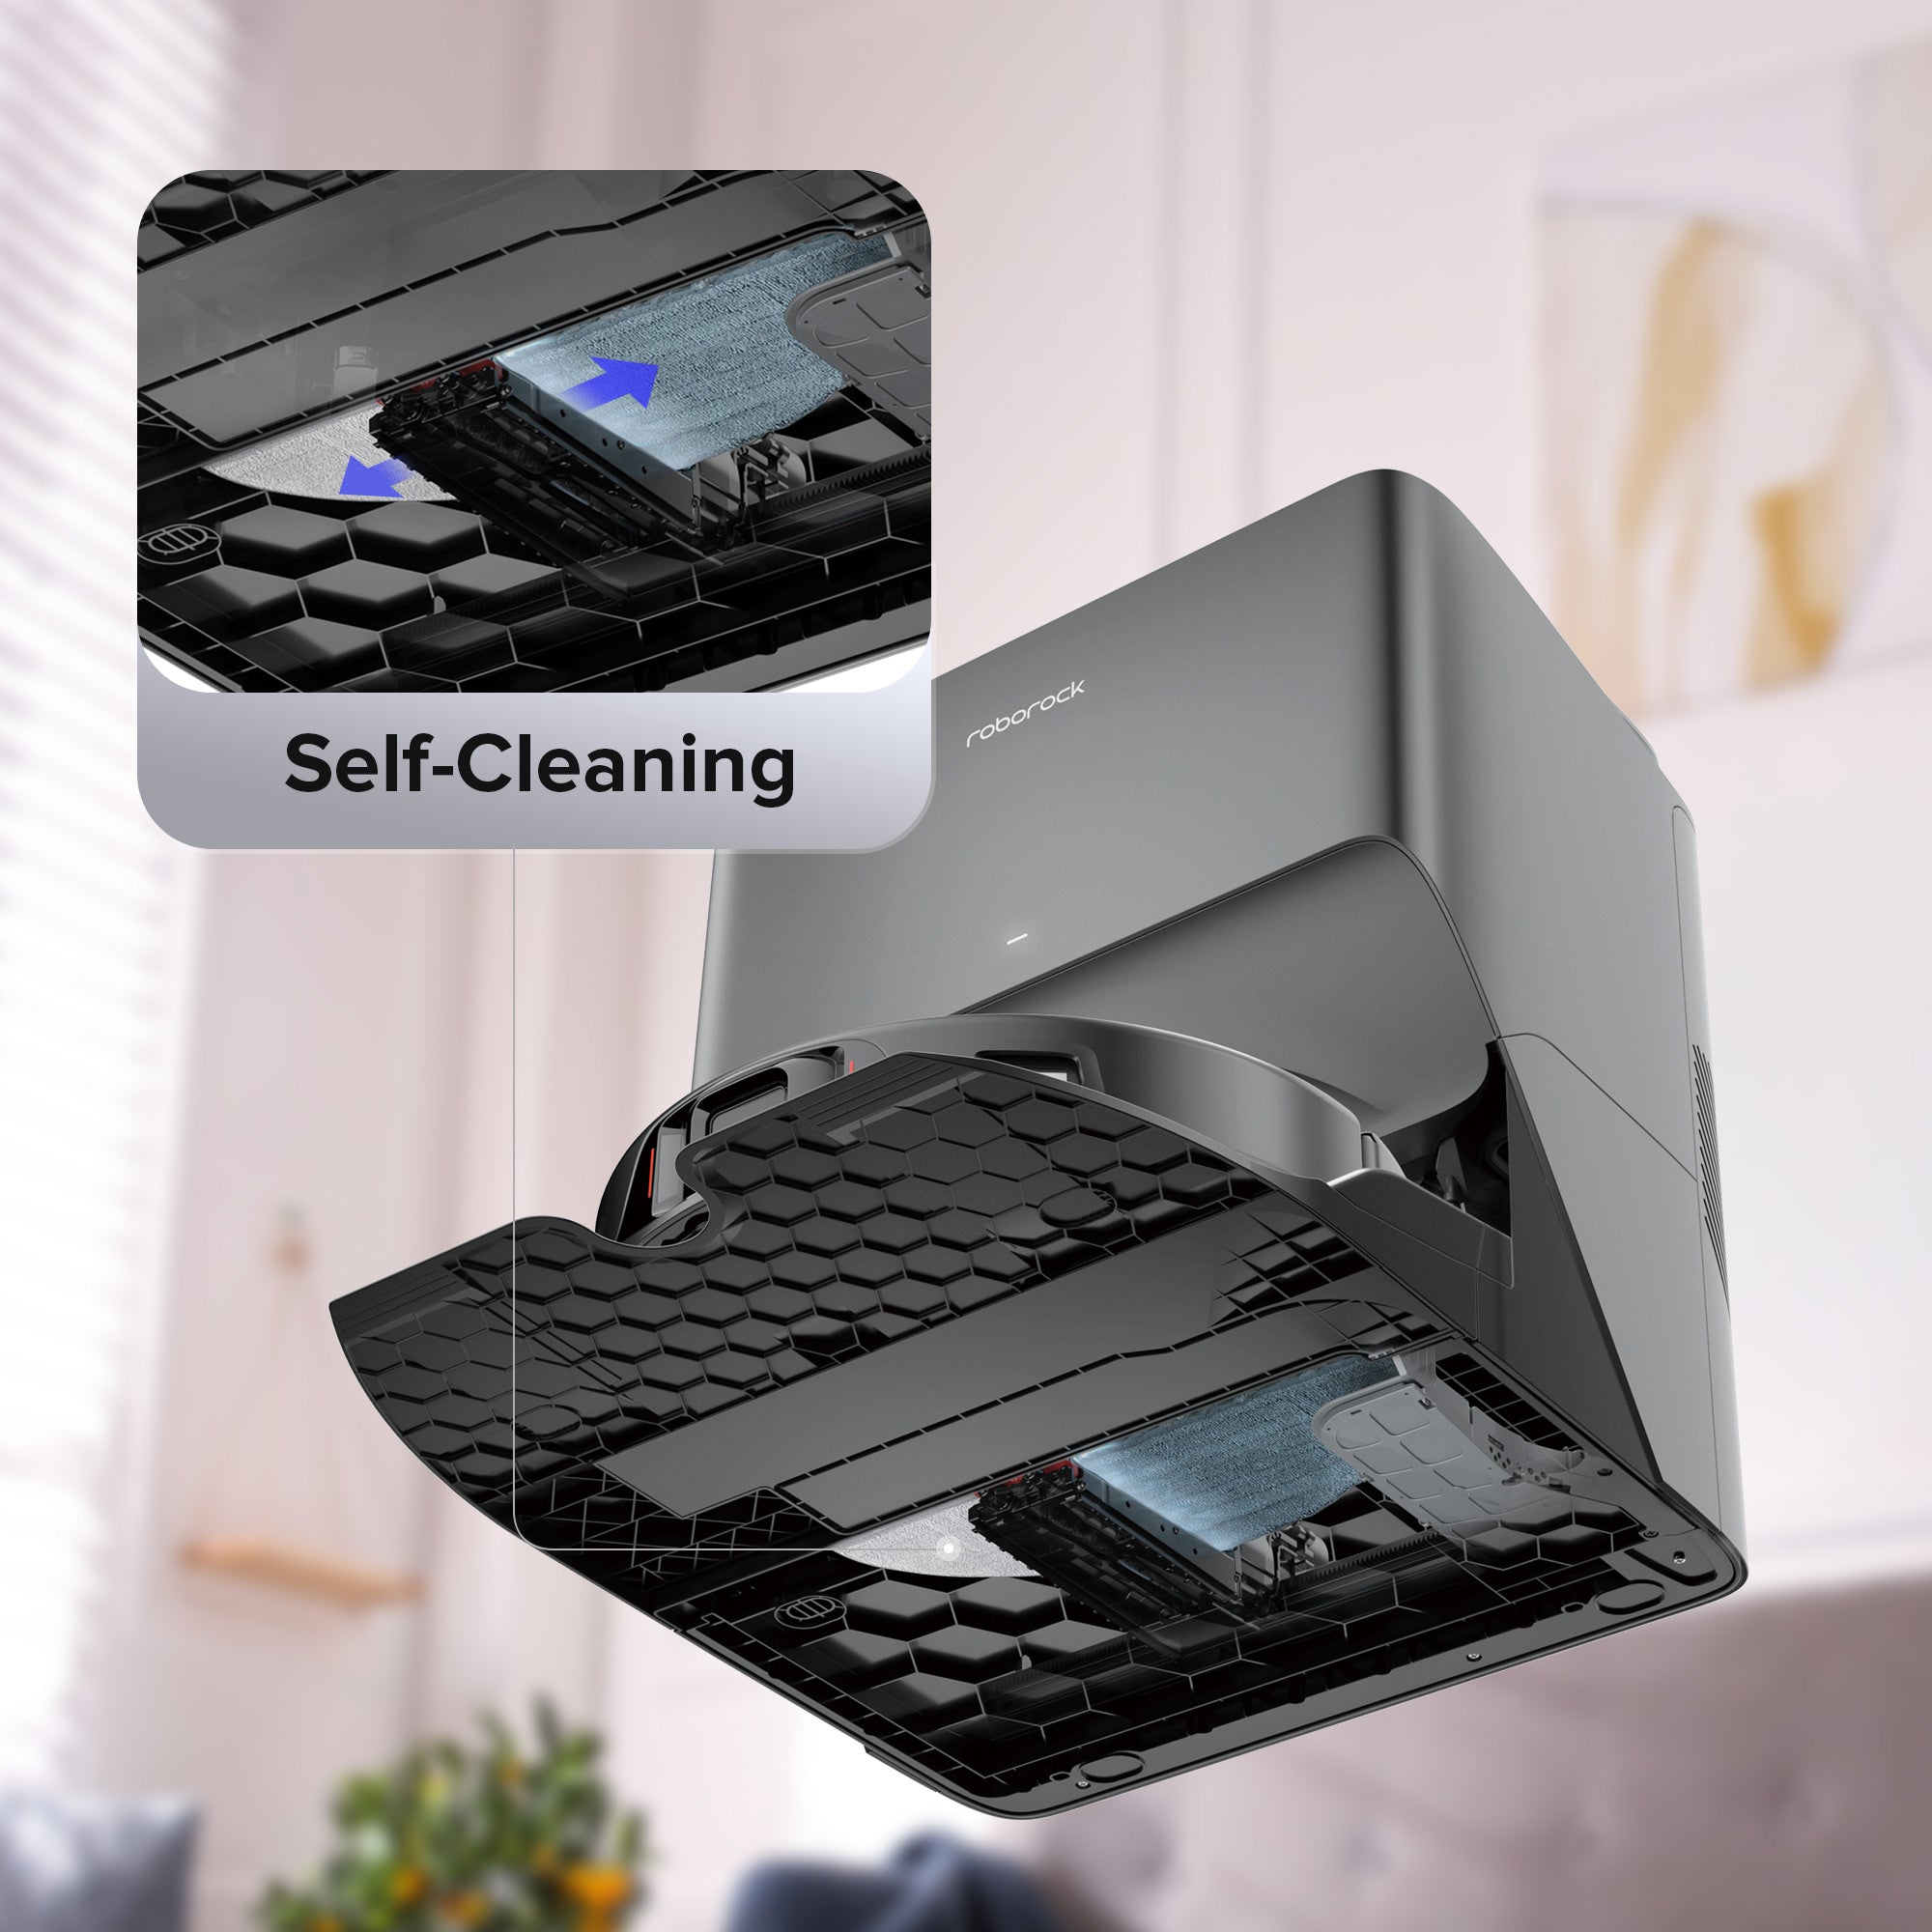 Roborock's new S8 lineup makes cleaning elegant, $300 off for a